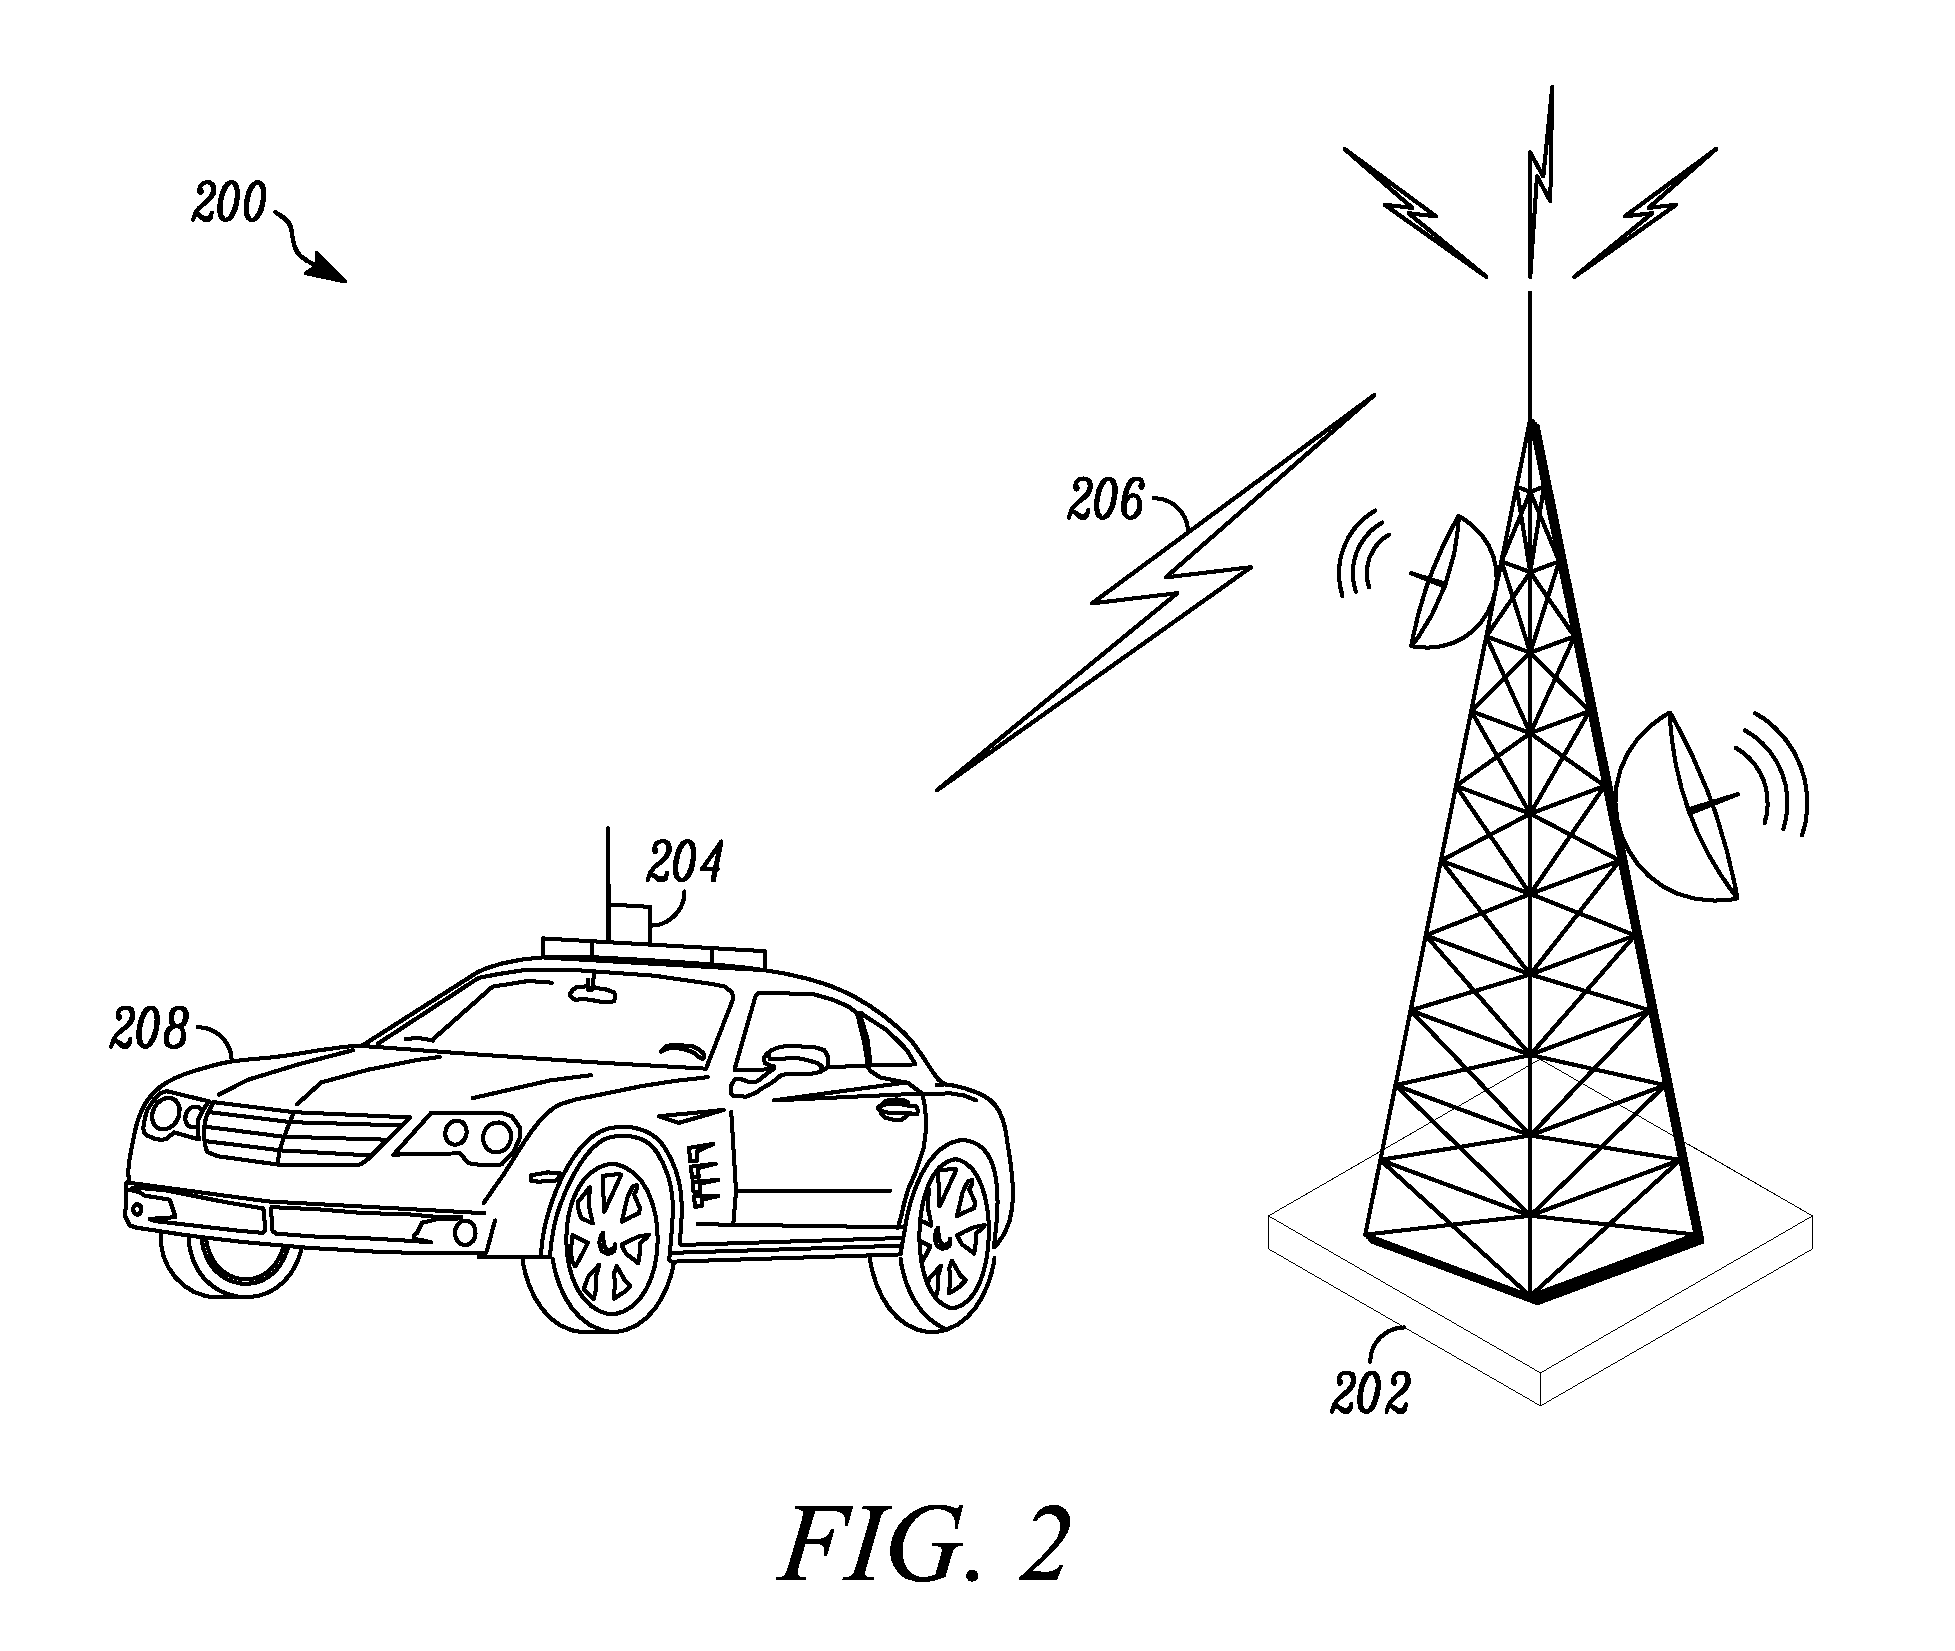 Methods and apparatus for detecting and mitigating radio interference among user equipment and base stations of geographically co-located and spectrally distinct wireless systems